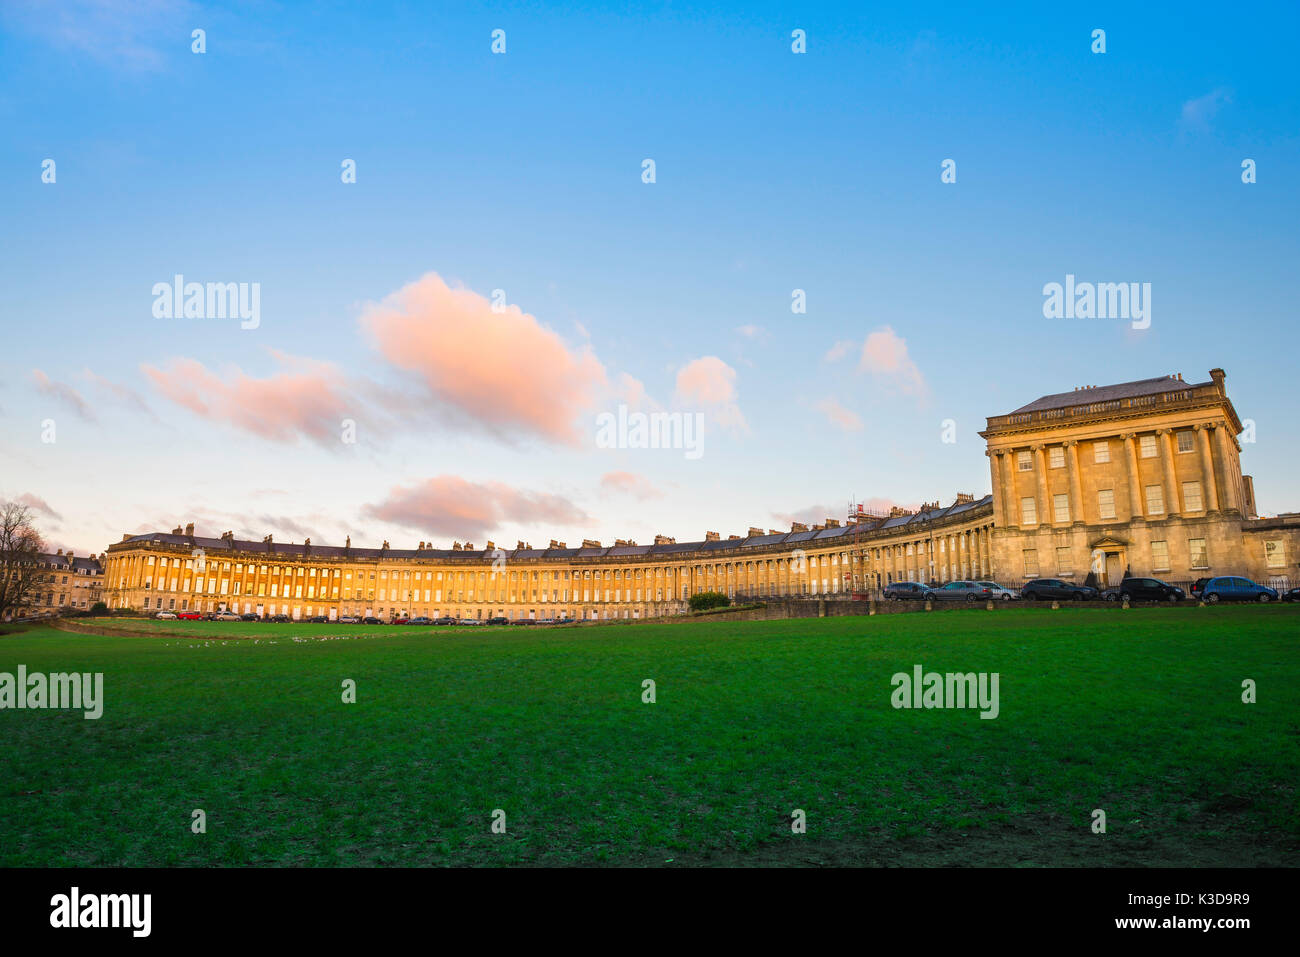 Bath Royal Crescent, wide view of the Royal Crescent - a row of 30 Georgian terraced houses laid out in a sweeping crescent in the centre of Bath, UK. Stock Photo